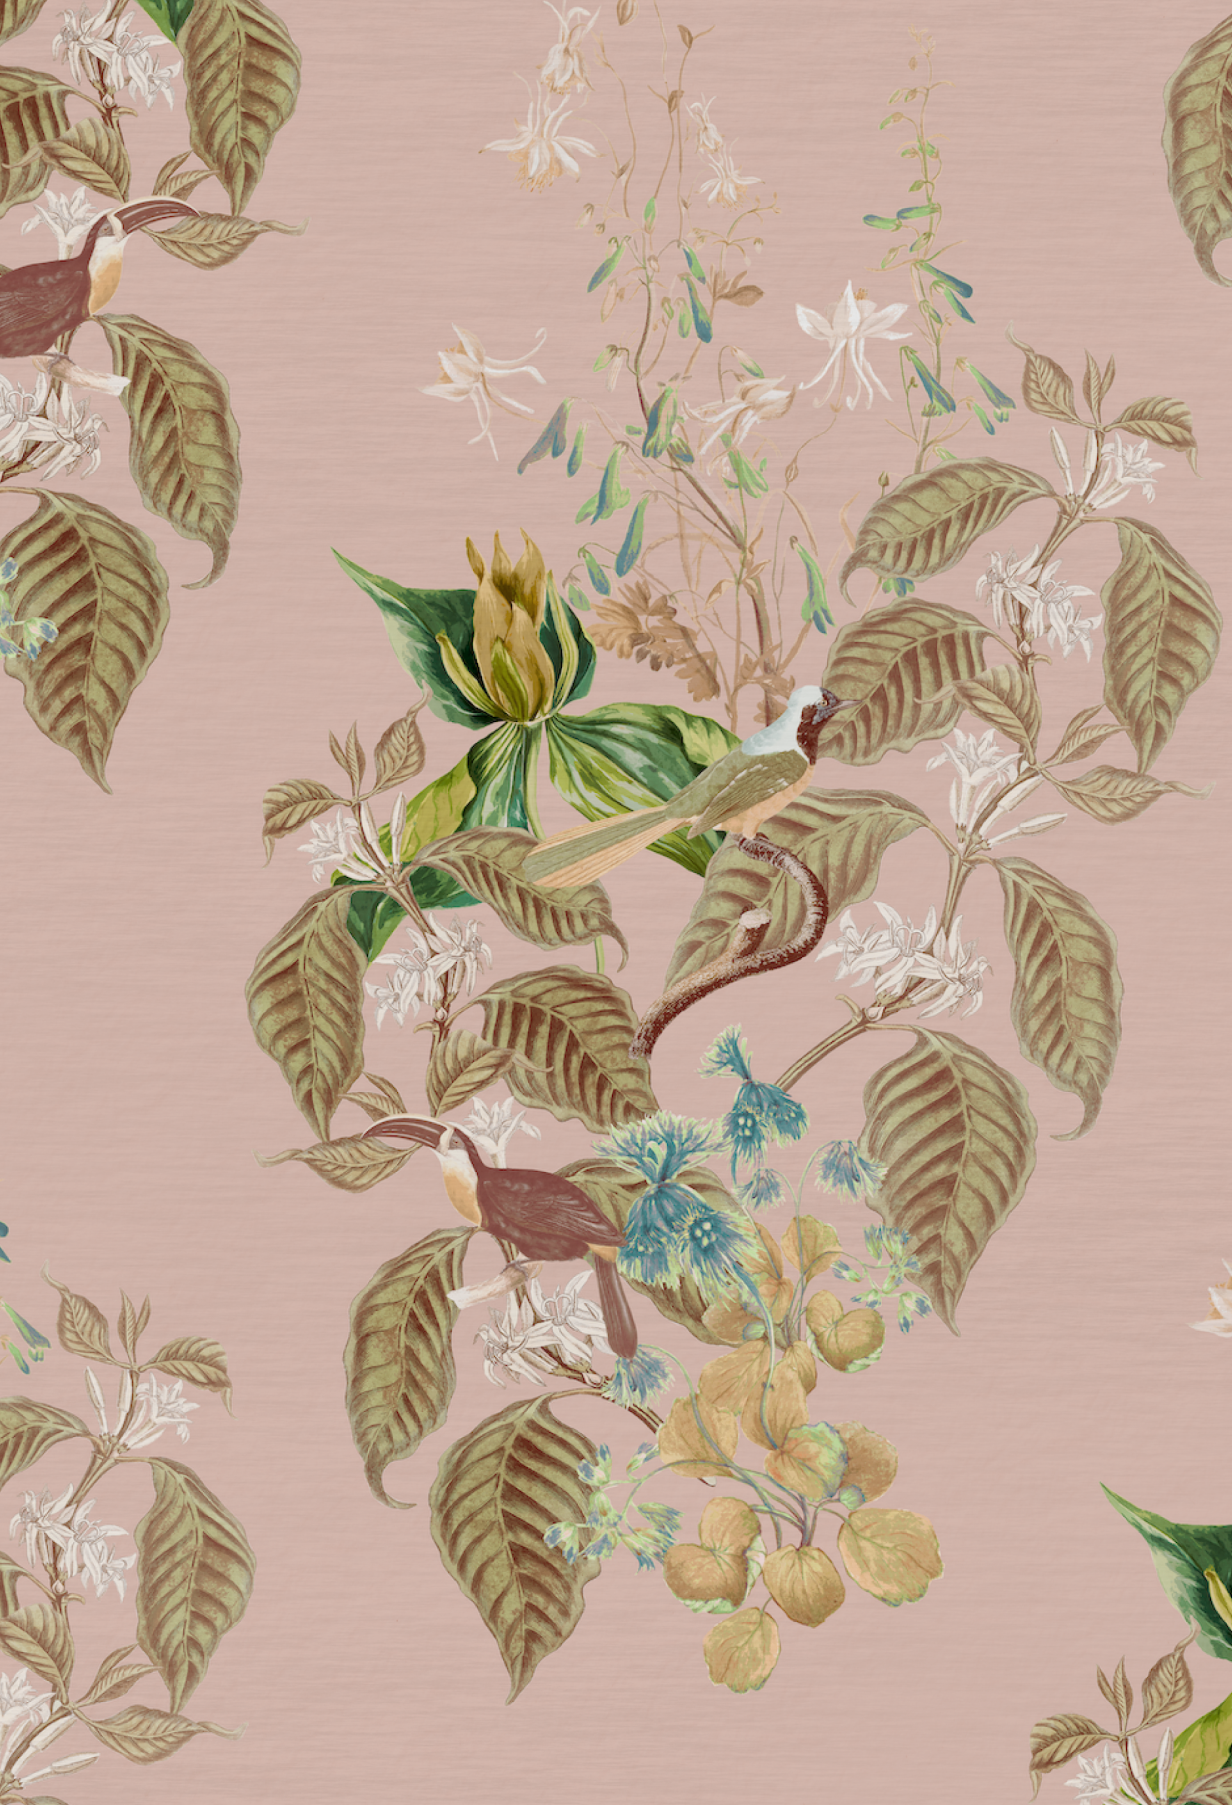 Aviary Isle in Cinder Rose luxurious wallpaper by Deus ex Gardenia with a bird and flowers on it.